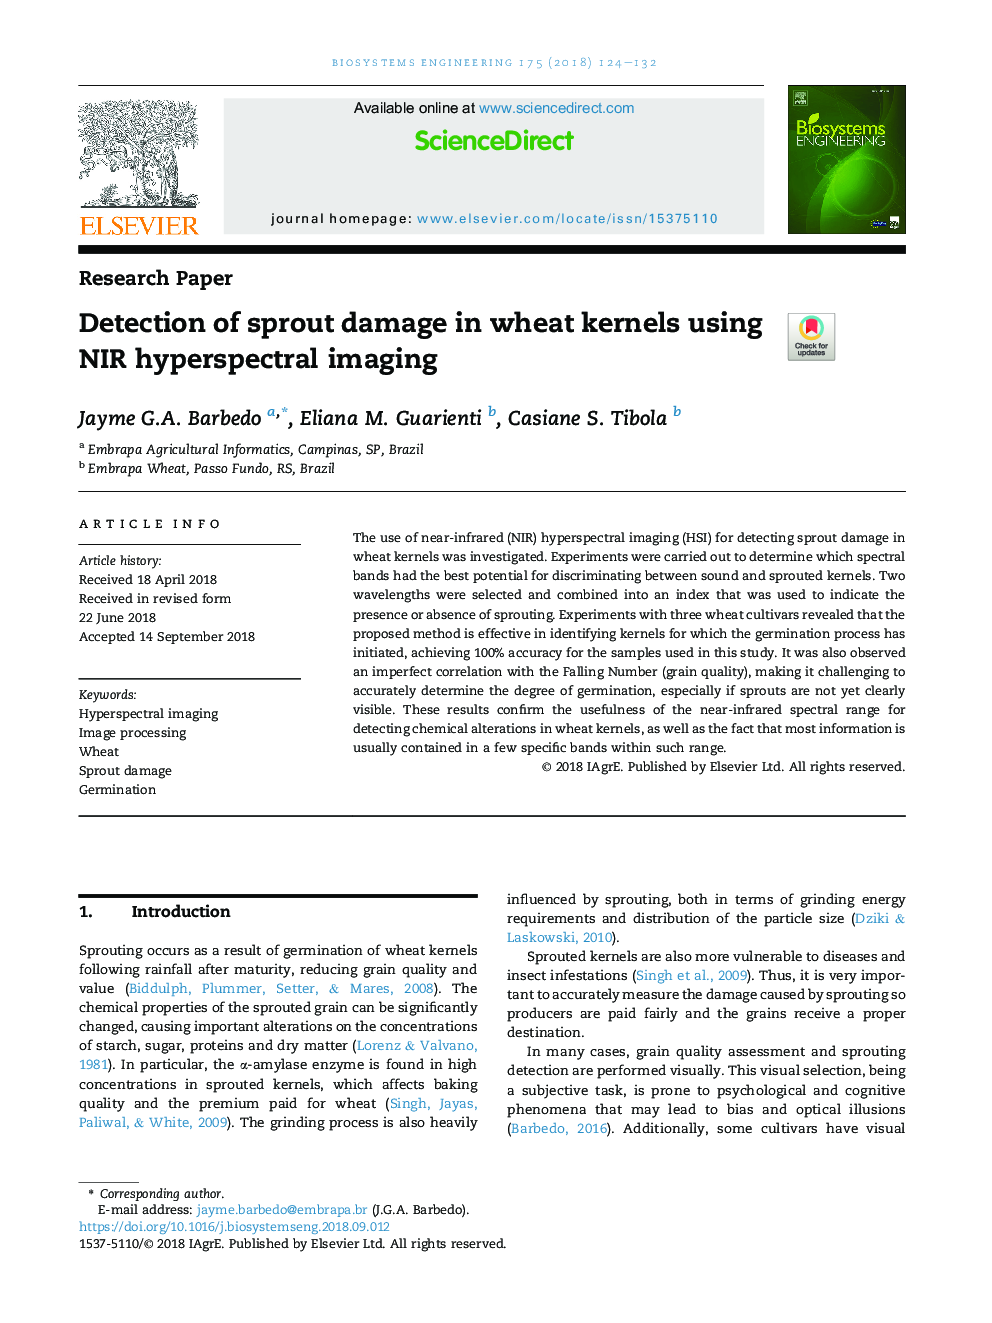 Detection of sprout damage in wheat kernels using NIR hyperspectral imaging